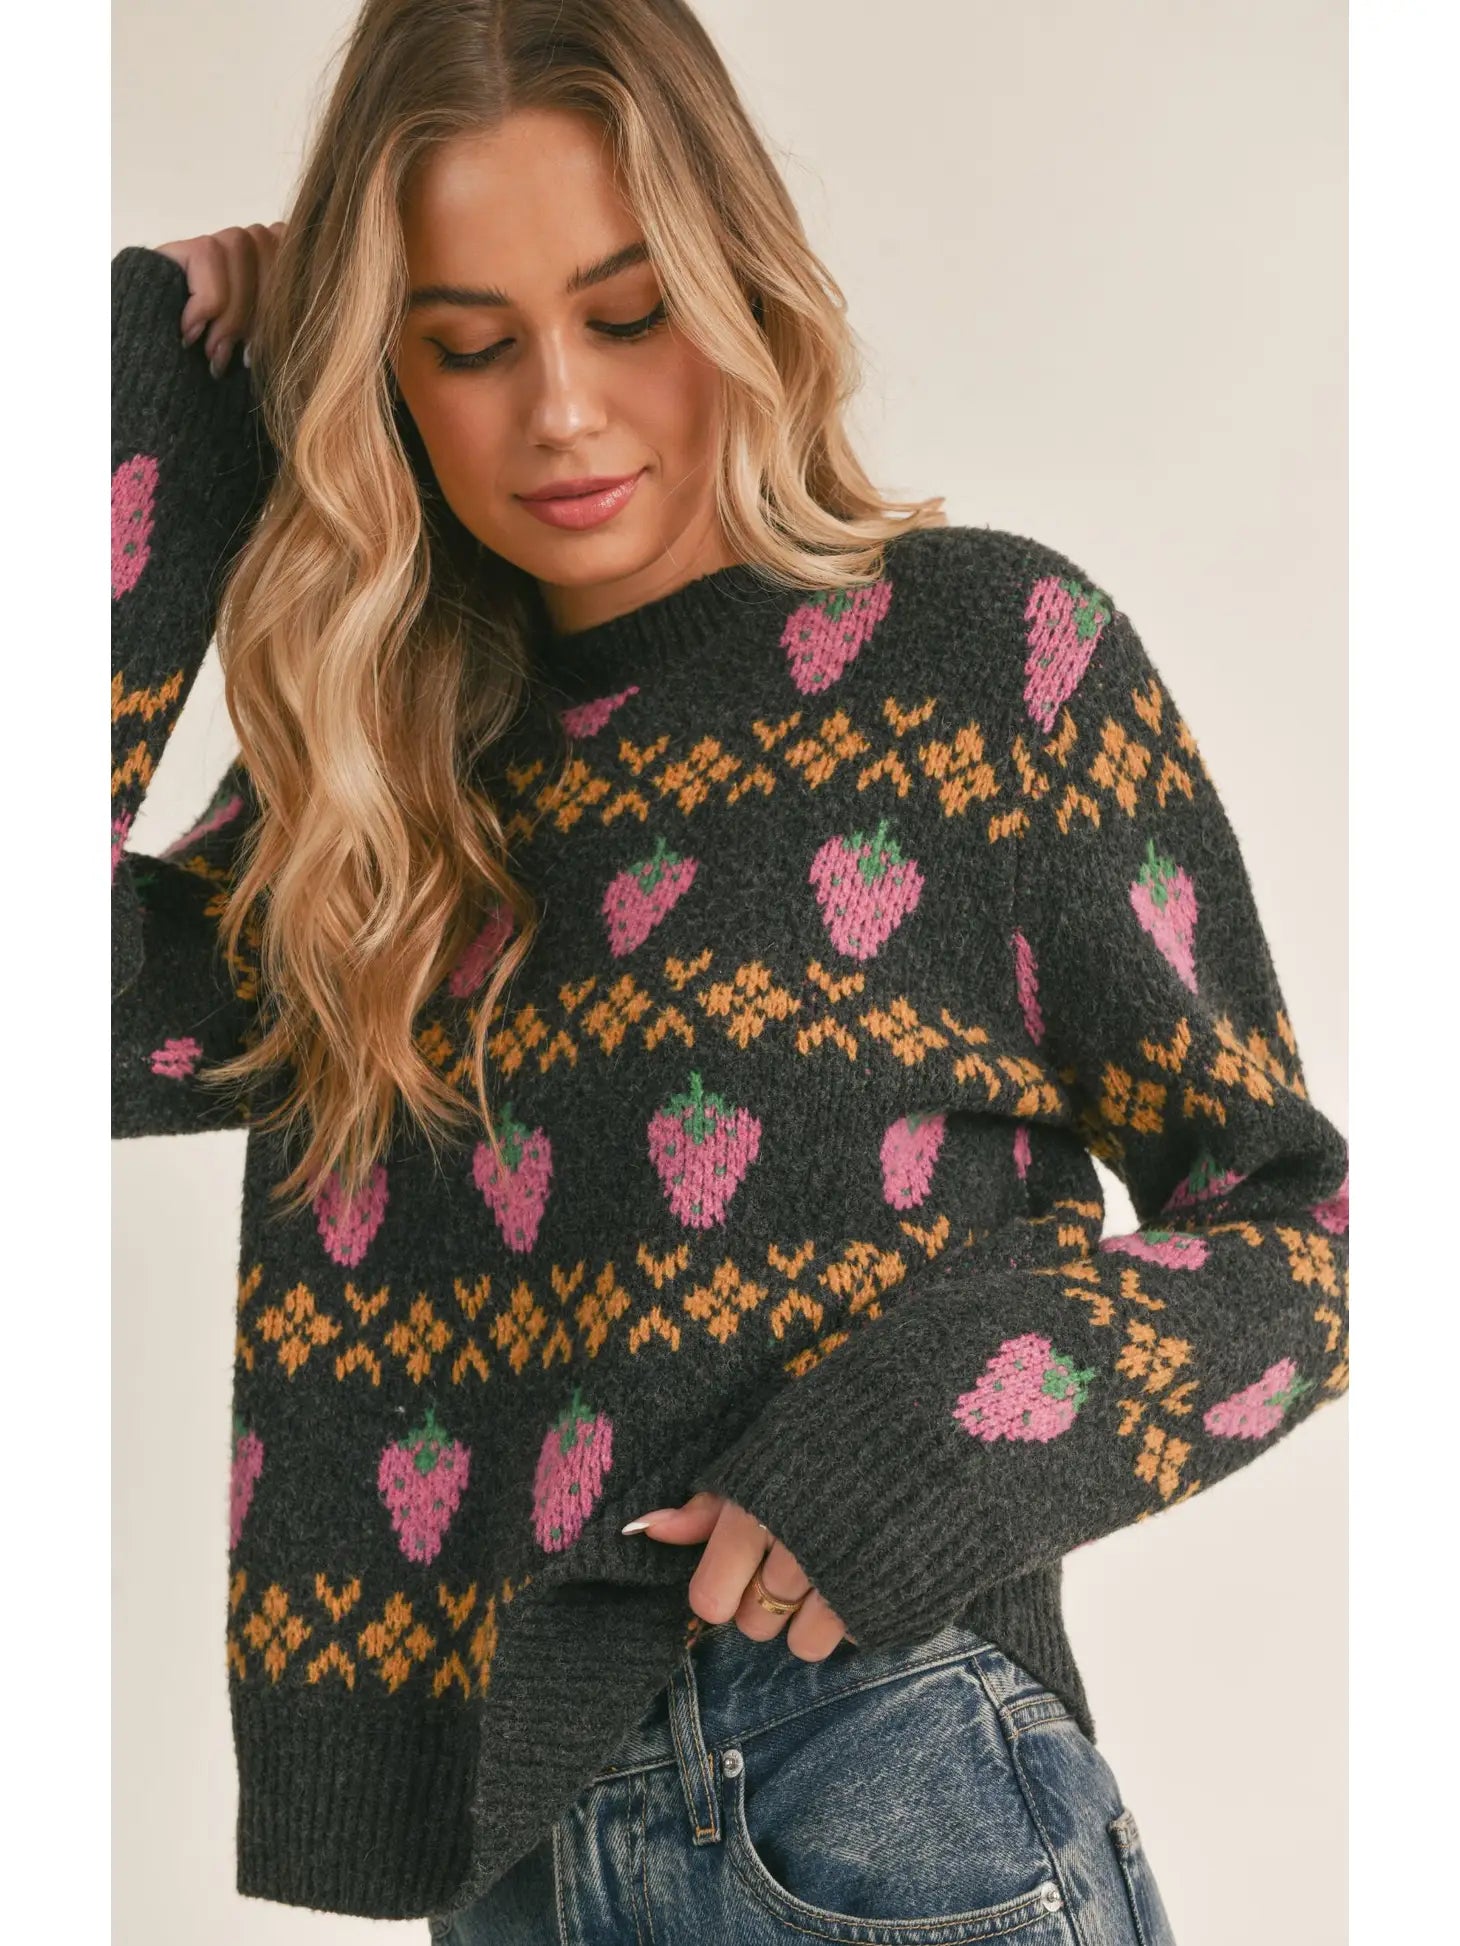 Berry Sweet Knit Charcoal Sweater